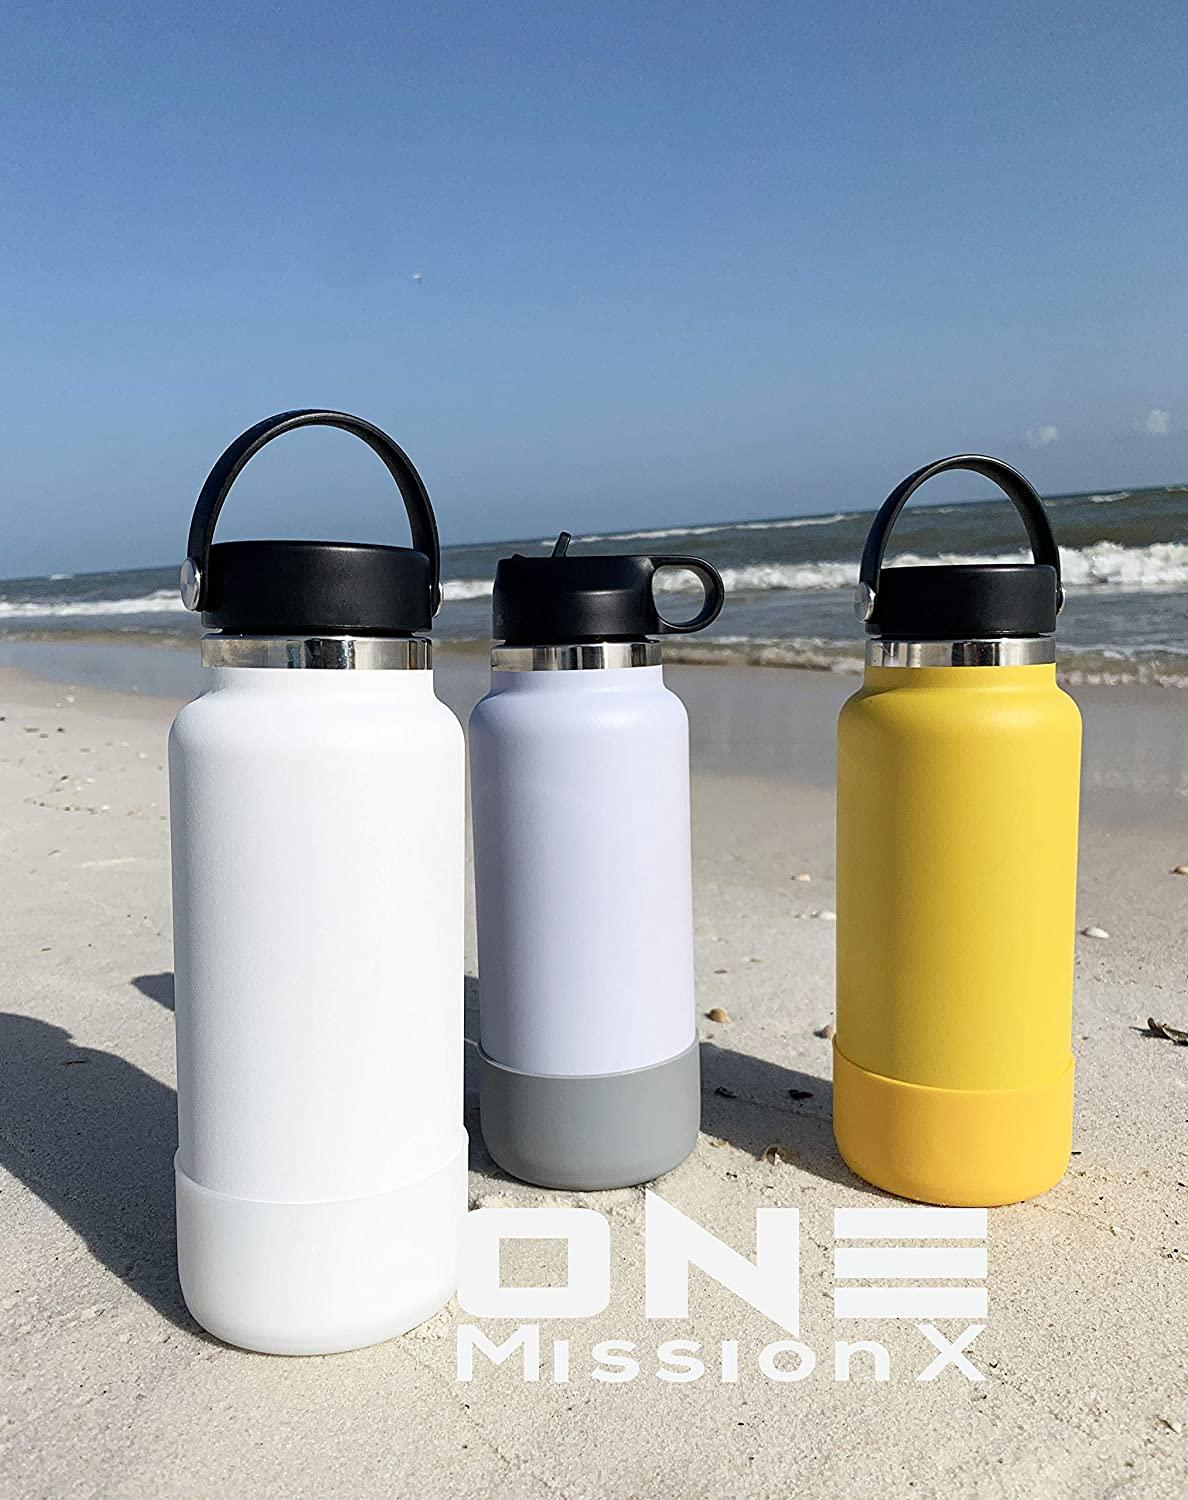 Hydro Flask Tumbler Protective Set - Silicone Boot Cover, Handle